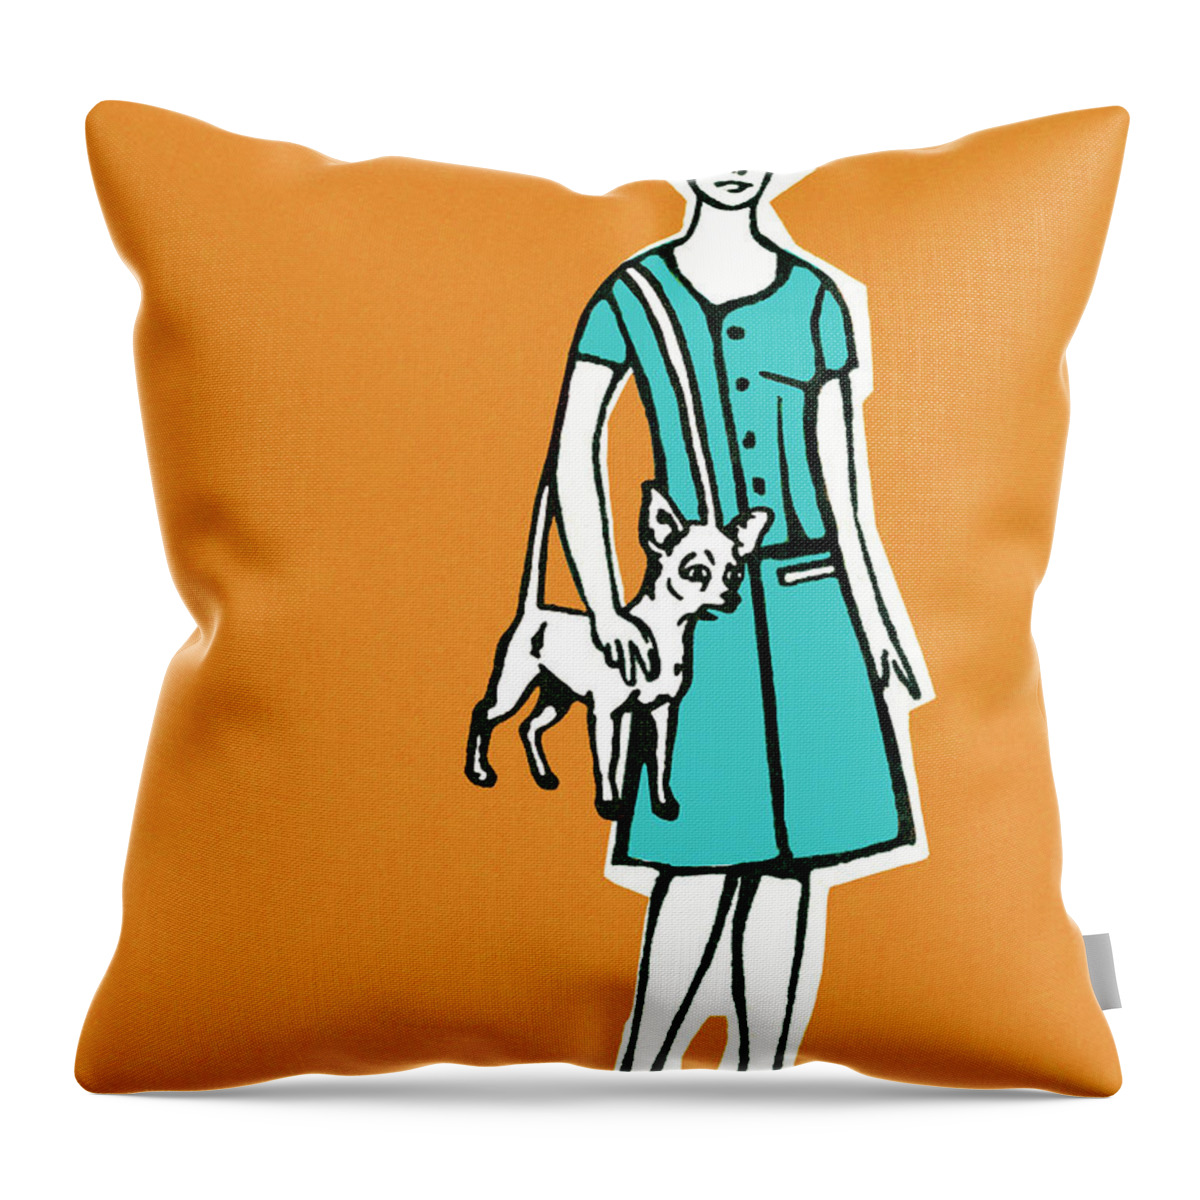 Accessories Throw Pillow featuring the drawing Woman With Dog Purse by CSA Images